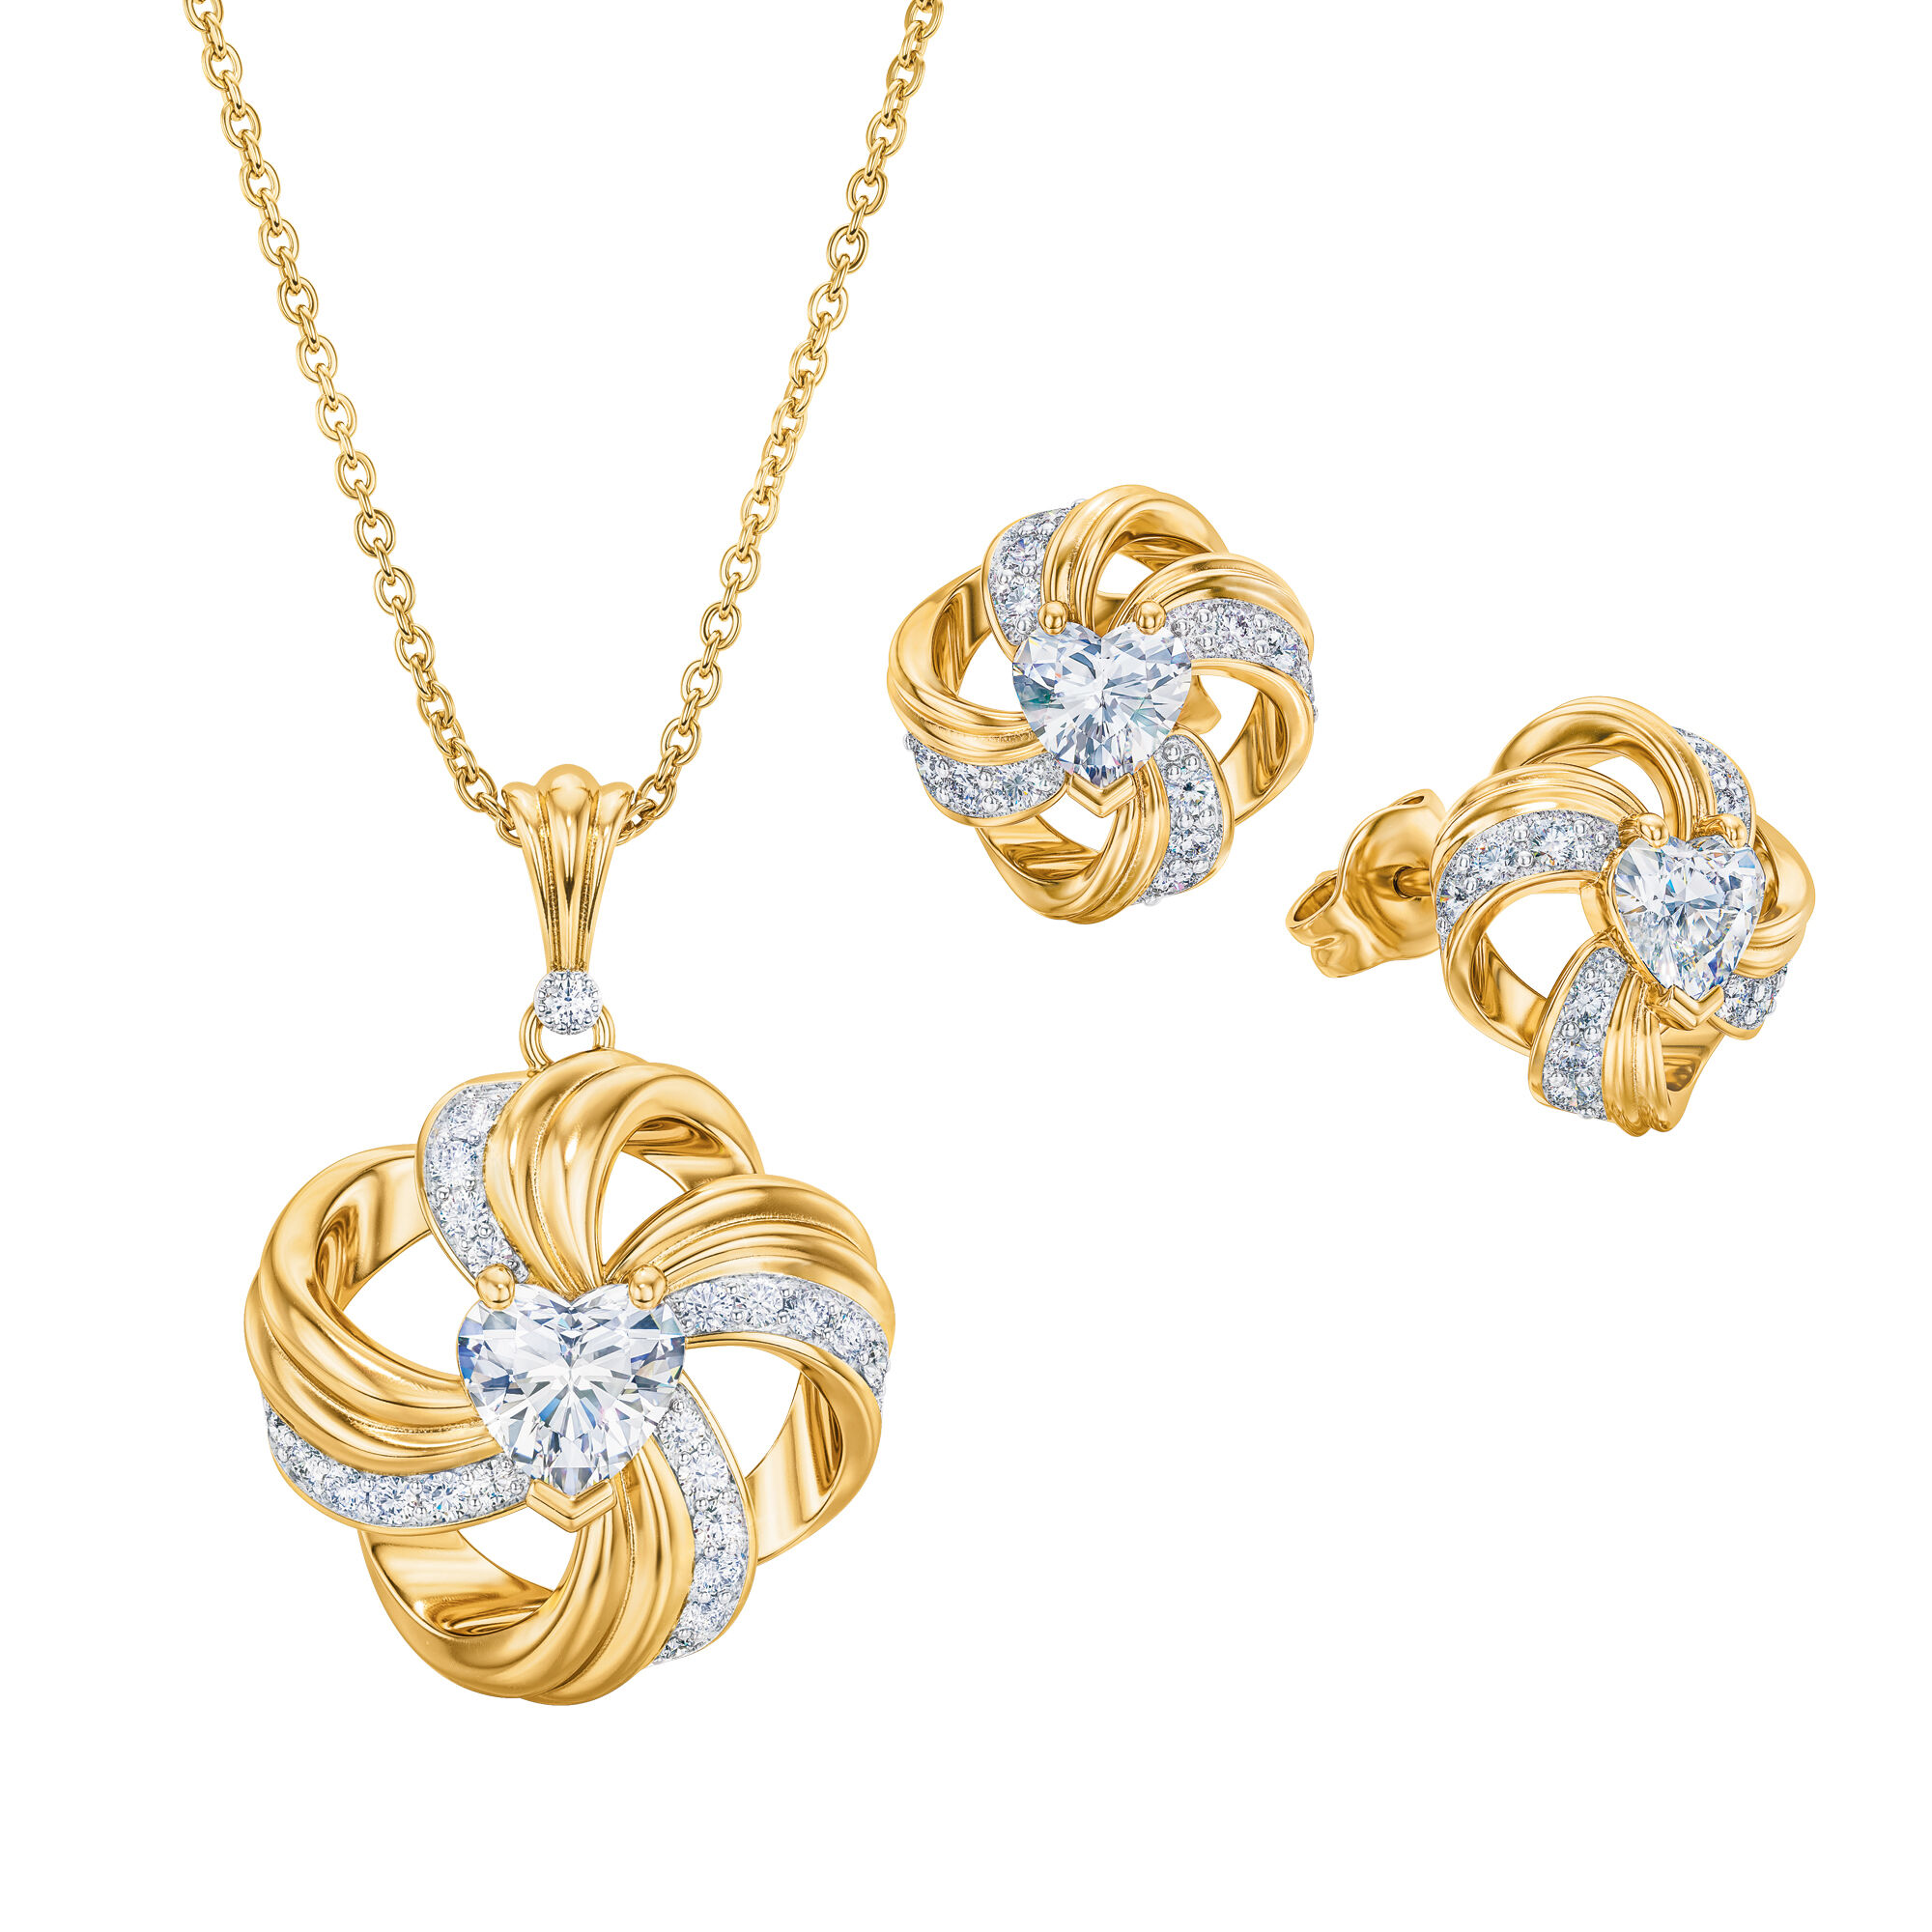 The Swirling Heart Pendant with FREE Matching Earrings 10891 0019 a main